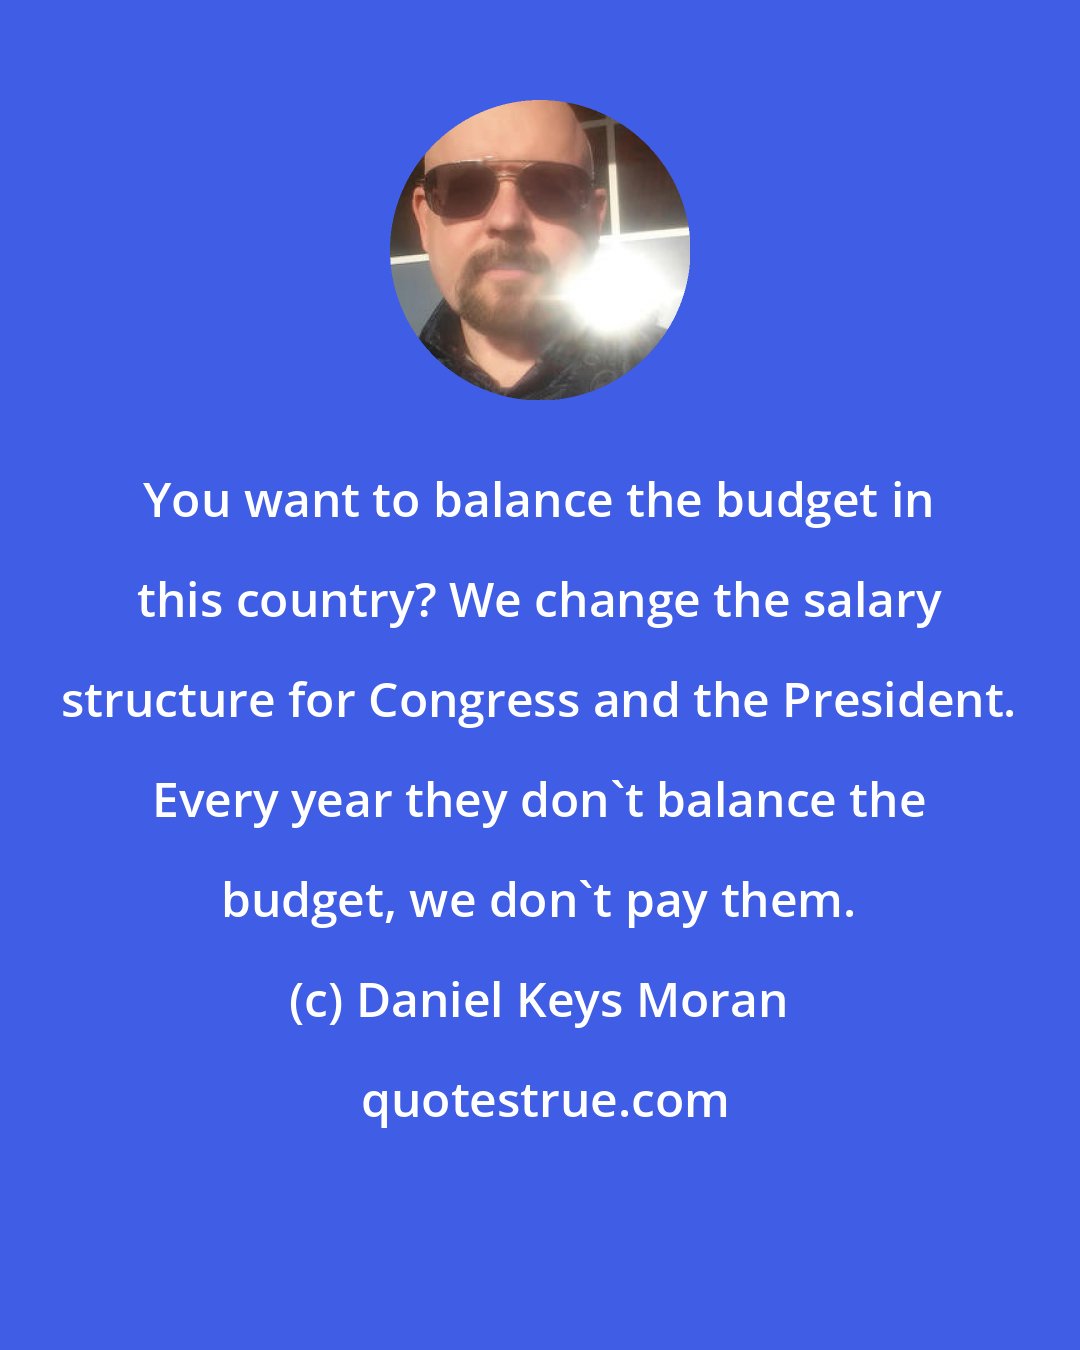 Daniel Keys Moran: You want to balance the budget in this country? We change the salary structure for Congress and the President. Every year they don't balance the budget, we don't pay them.